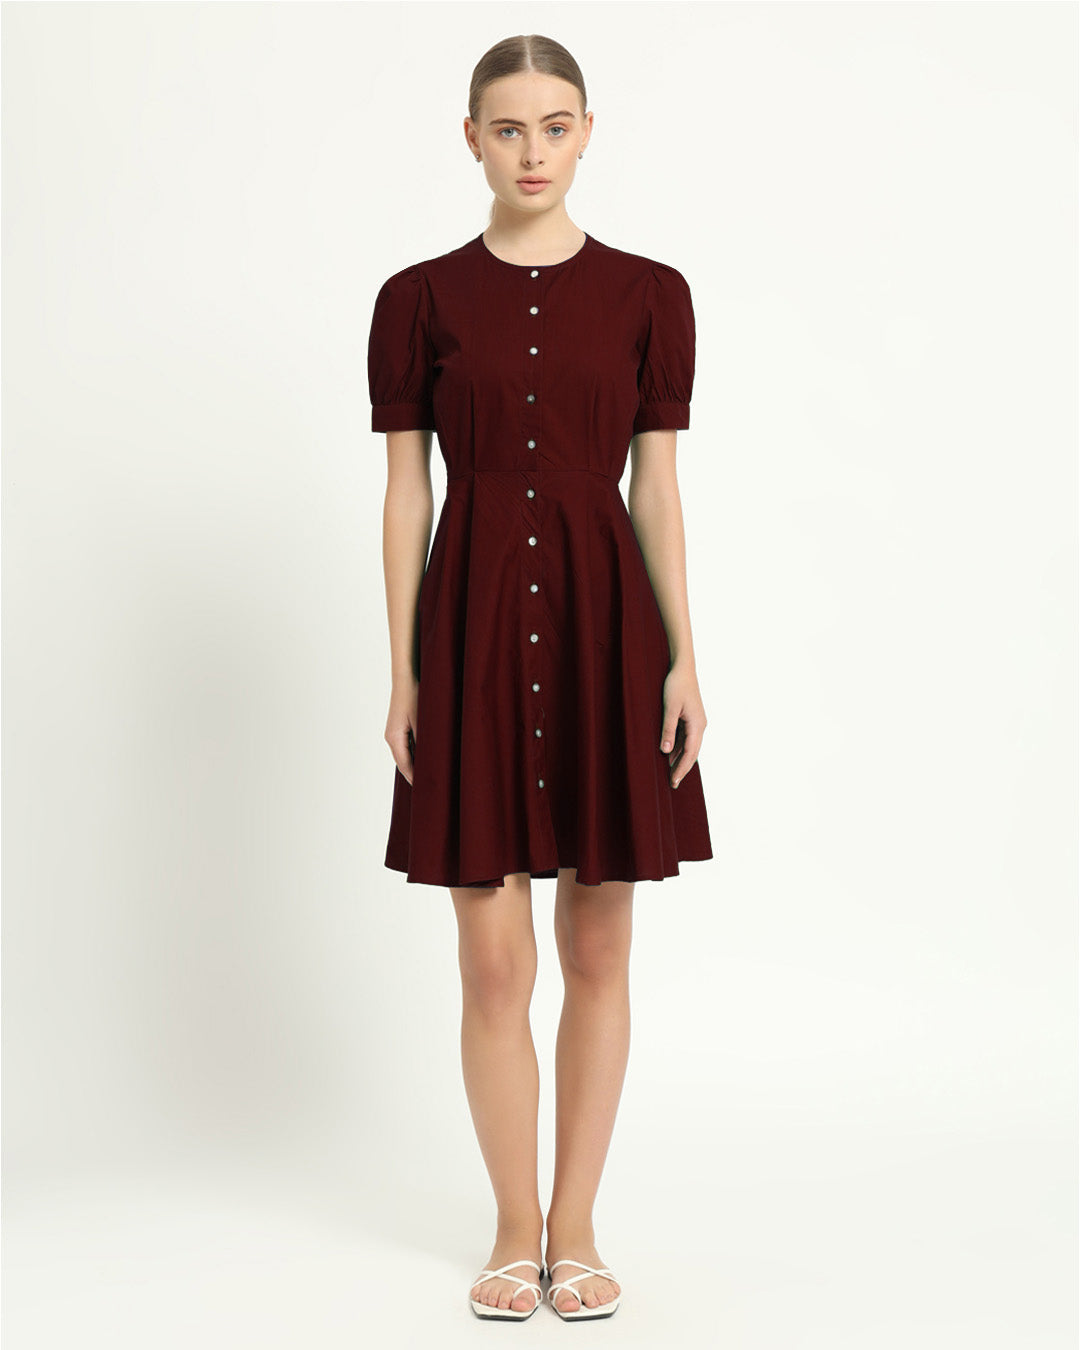 The Kittsee Rouge Cotton Dress